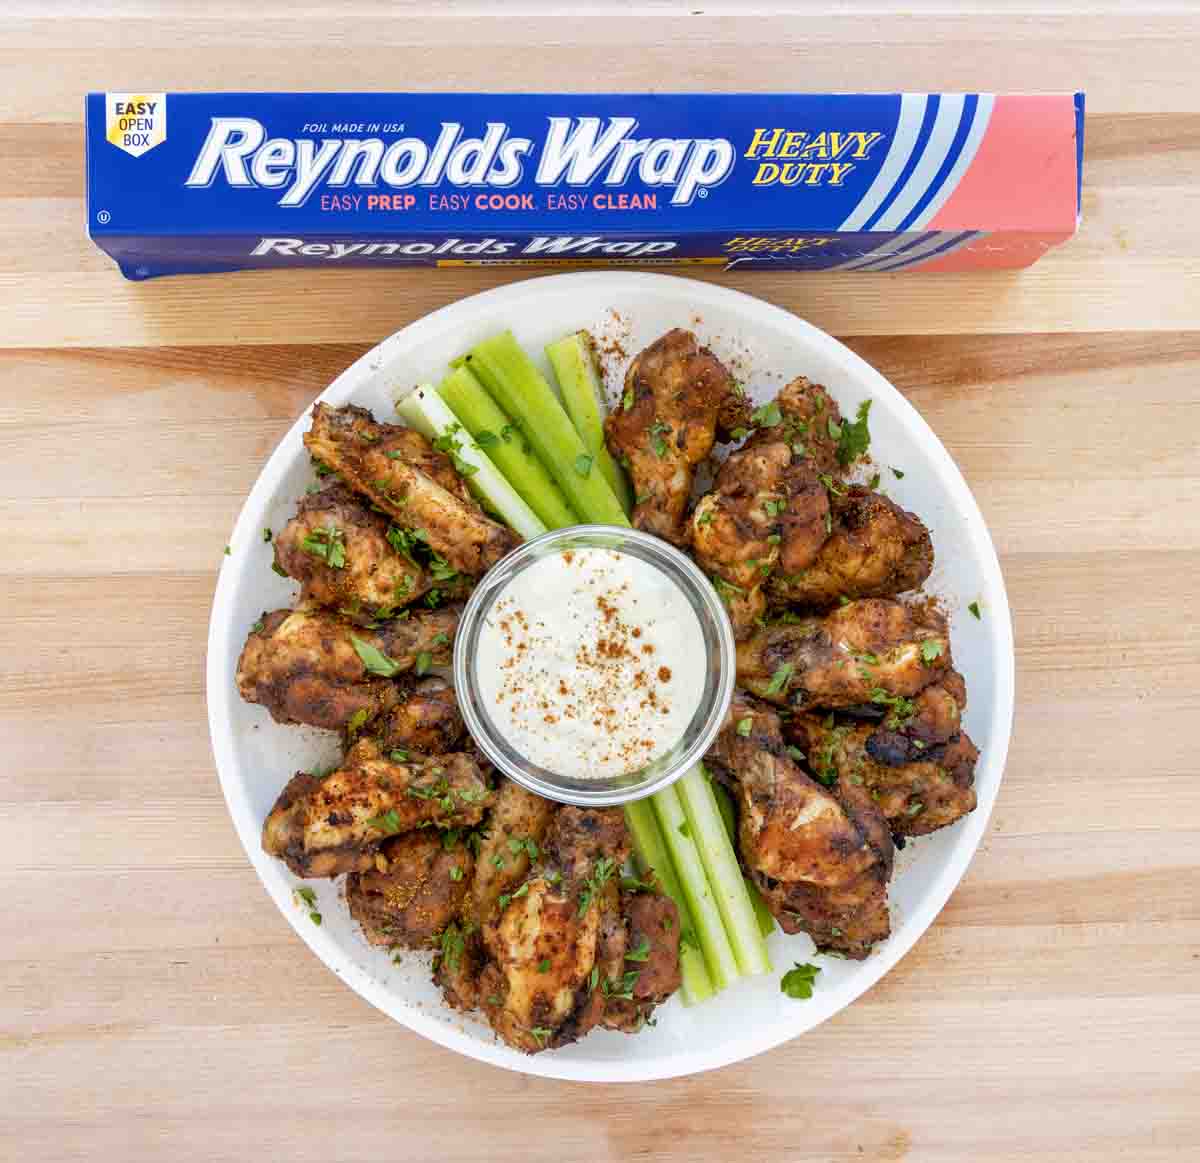 Cajun chicken wings on a white plate with celery and bleu cheese dressing next to a box of Reynolds foil